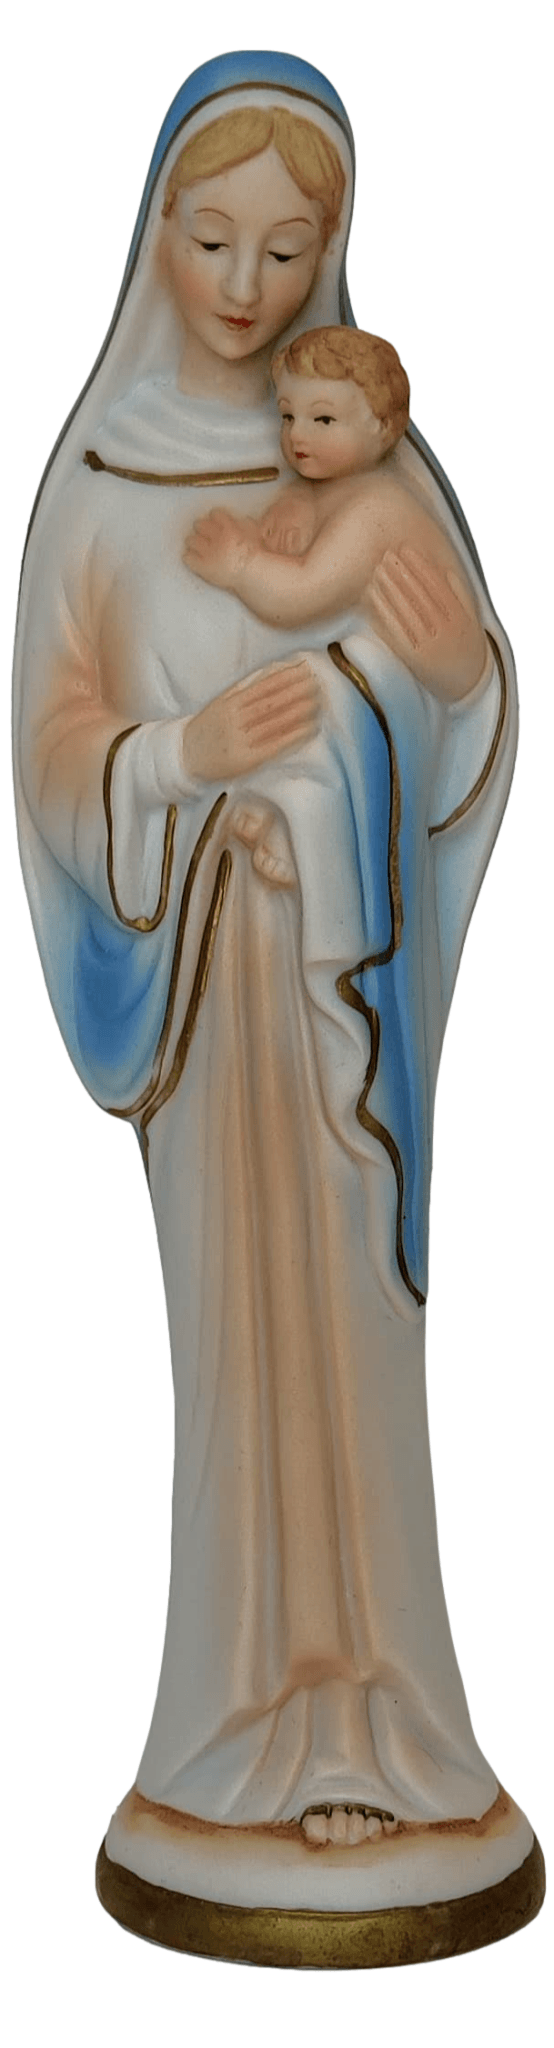 Statue Madonna and Child Porcelain Handpainted in Italy H: 8.5 inches X W: 2.5 inches - Ysleta Mission Gift Shop- VOTED El Paso's Best Gift Shop